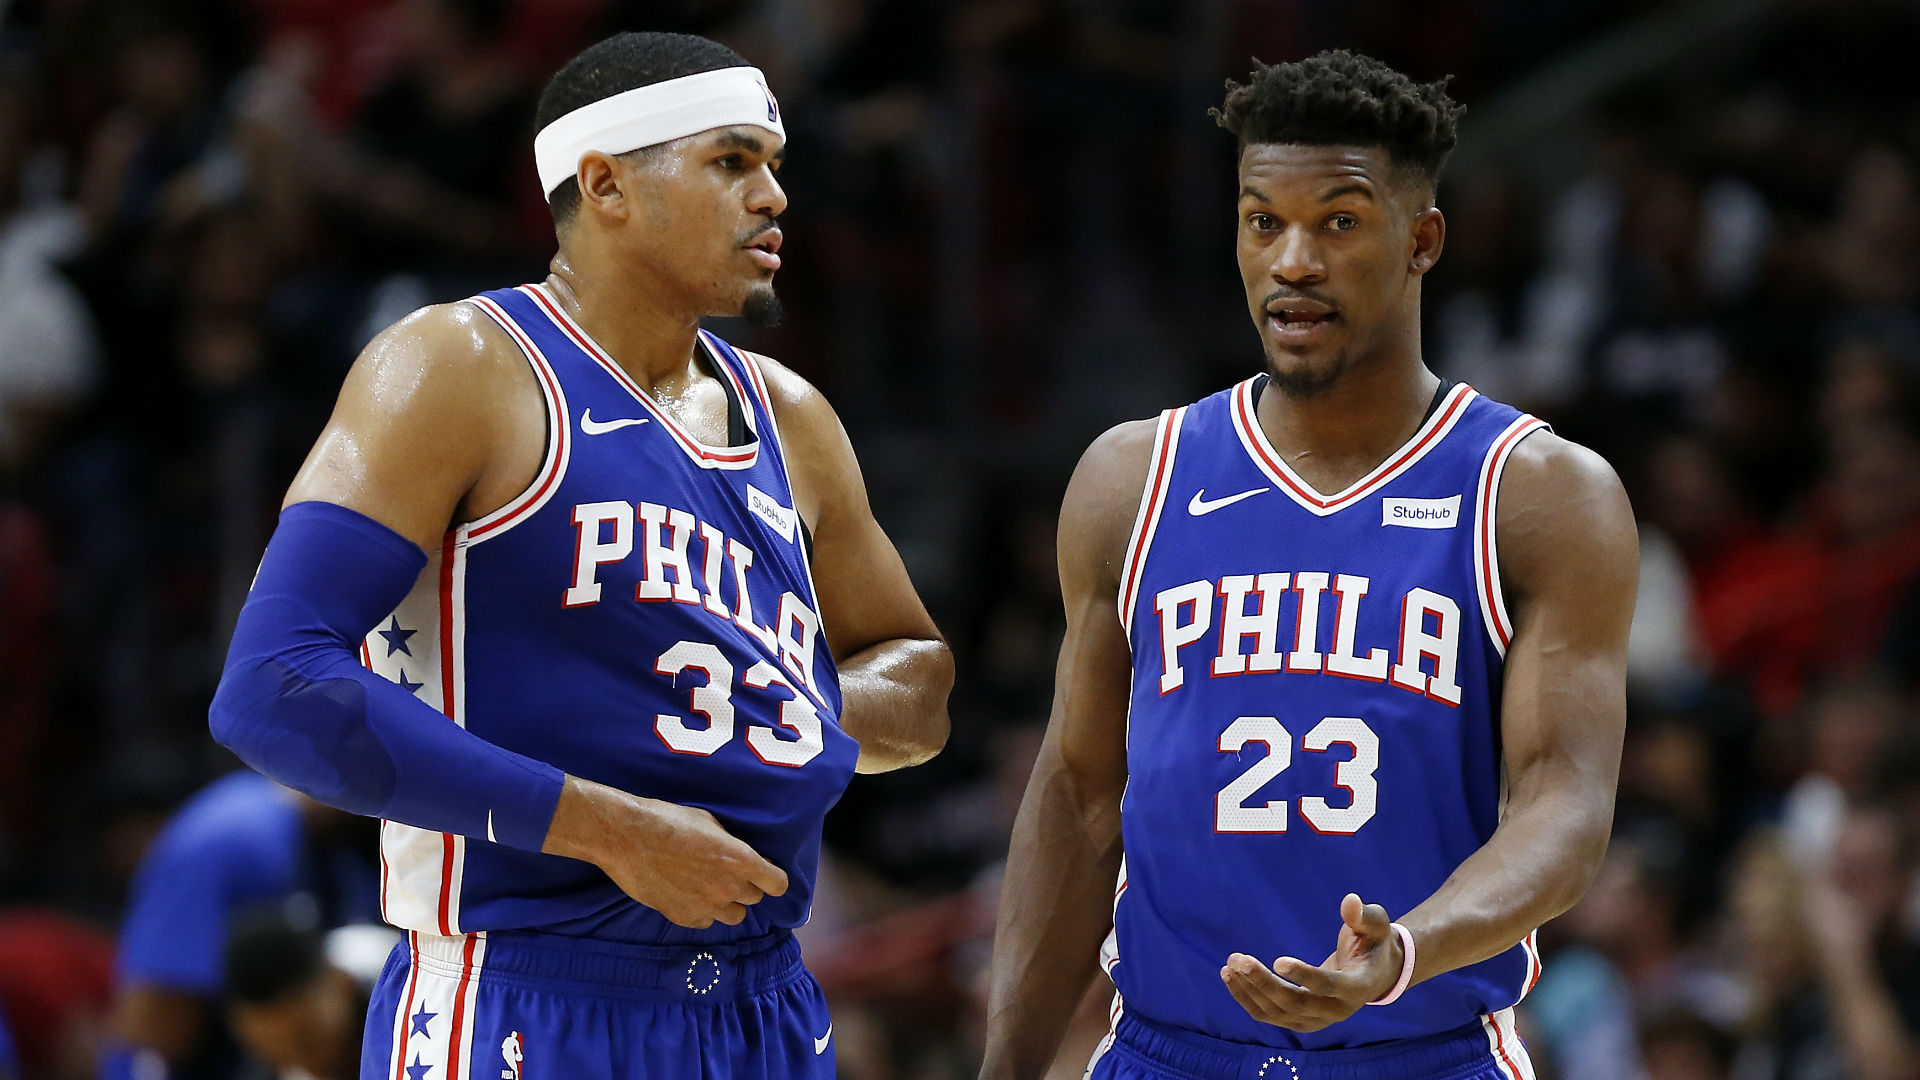 NBA playoffs 2019 Early East upsets only heighten freeagency anxiety